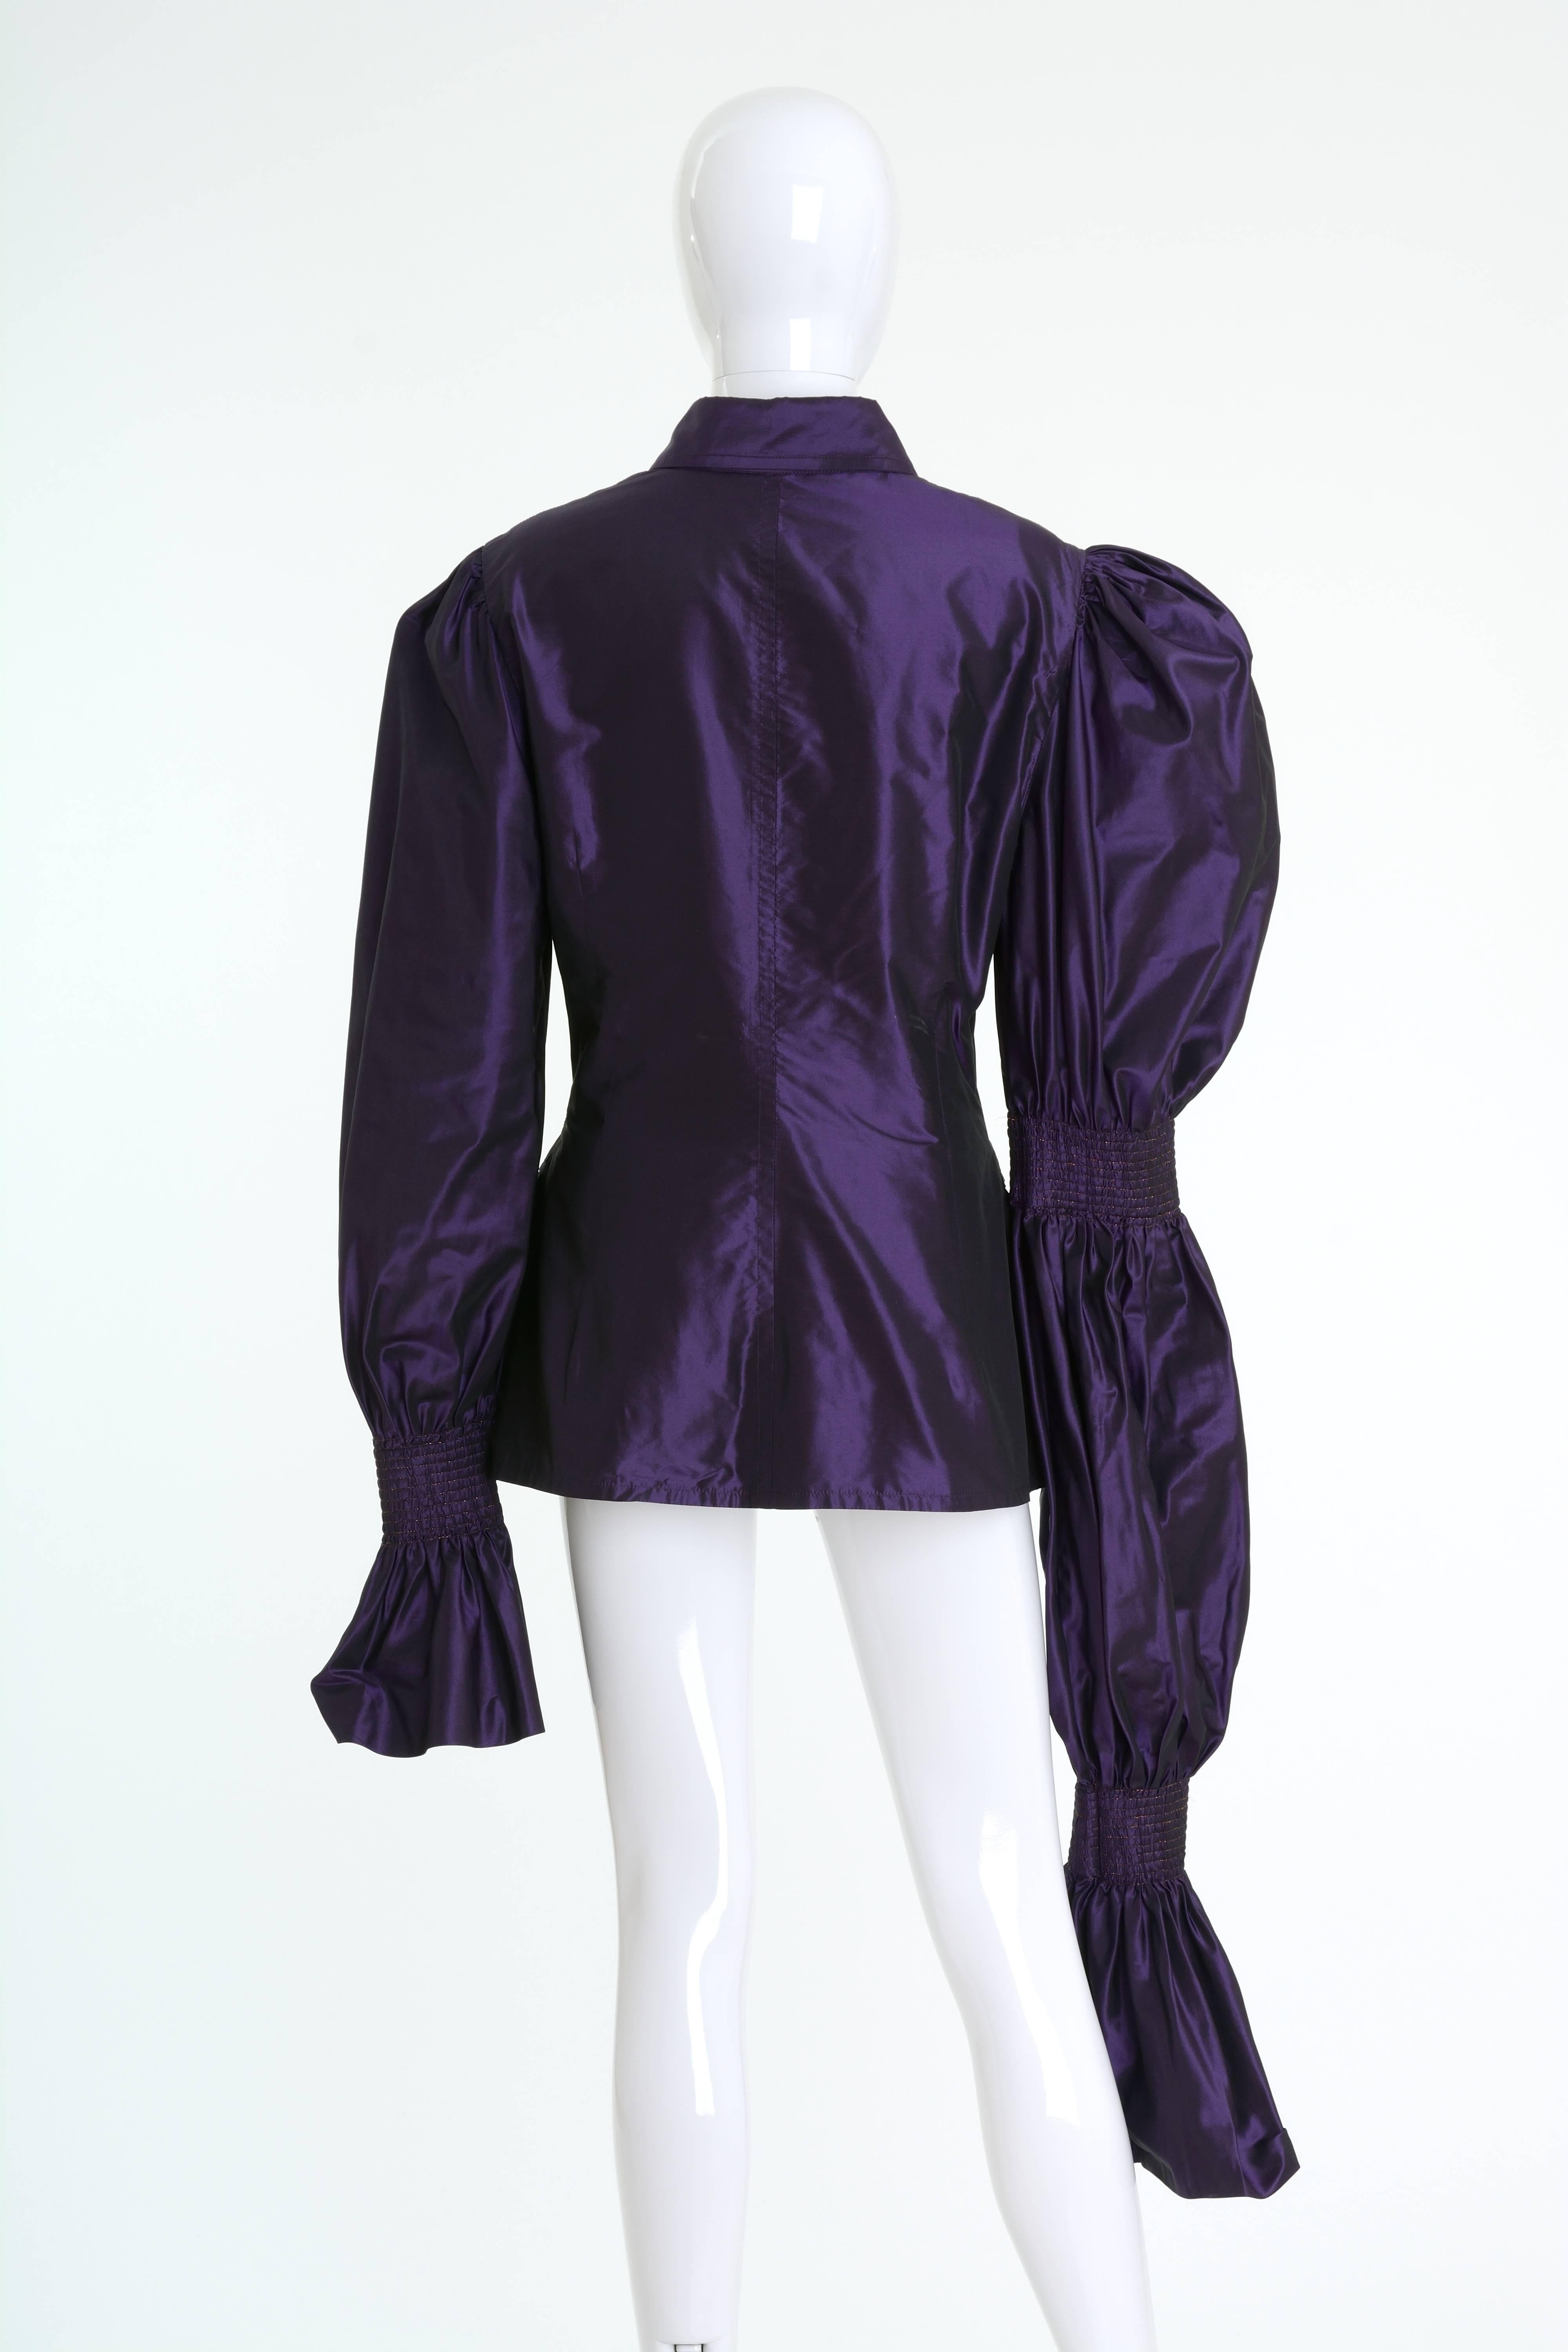 This amazing 1990s Gianfranco Ferrè blouse jacket is in purple silk taffeta fabric and has large puffed asymmetric sleeves with lurex details and fitted line with fabric buttons closure and frontal flap pockets. 

Very good vintage condition

Label: